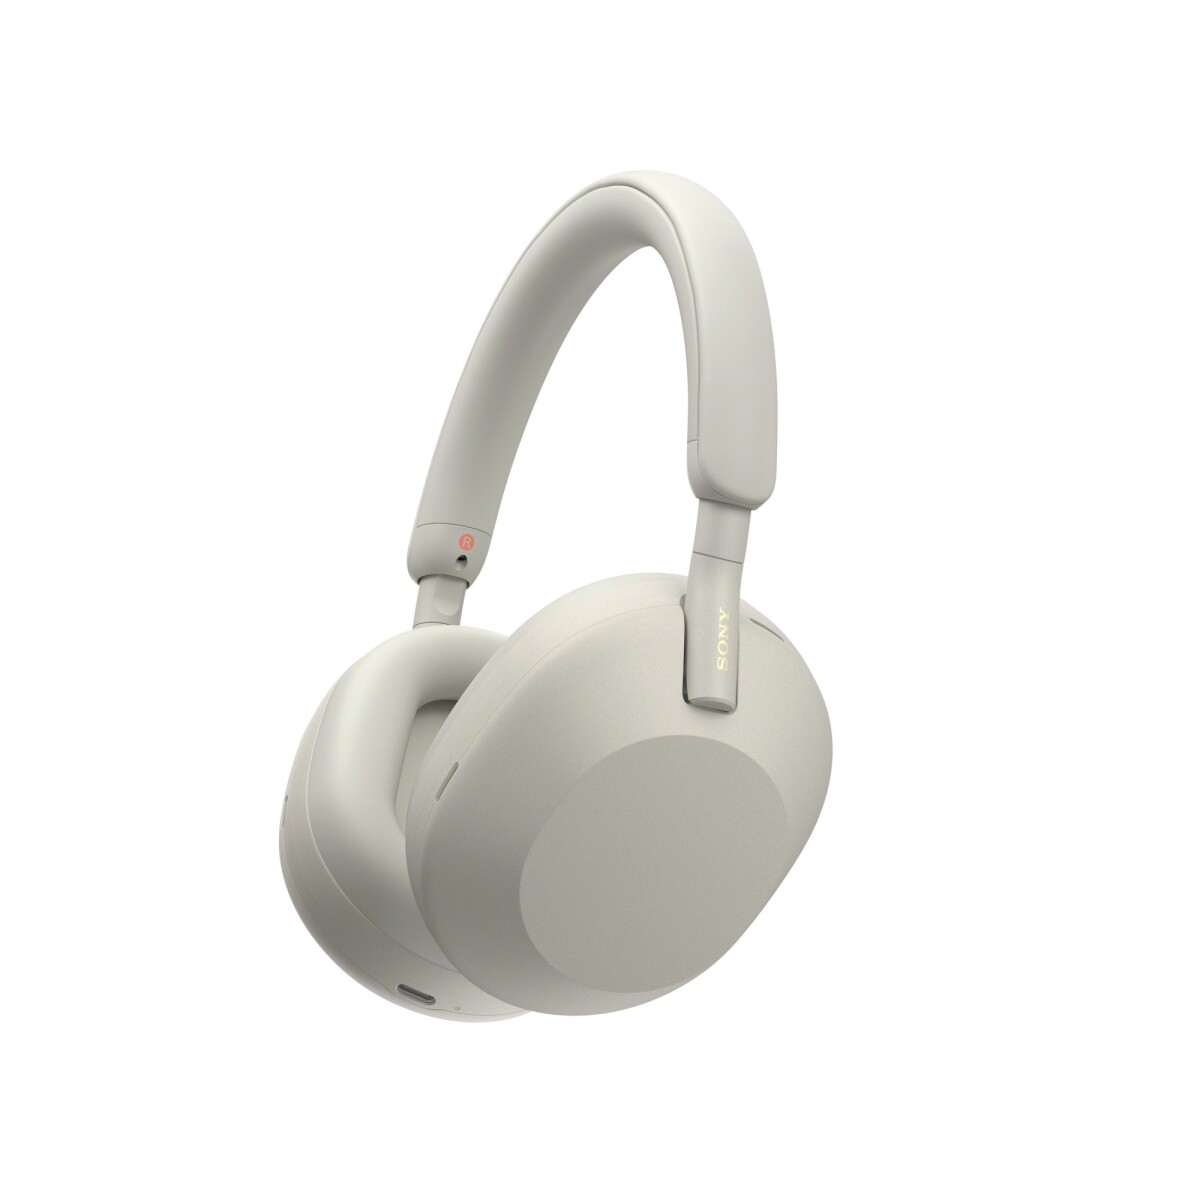 Auriculares SONY inalámbricos con Noise Cancelling WH-1000XM5 